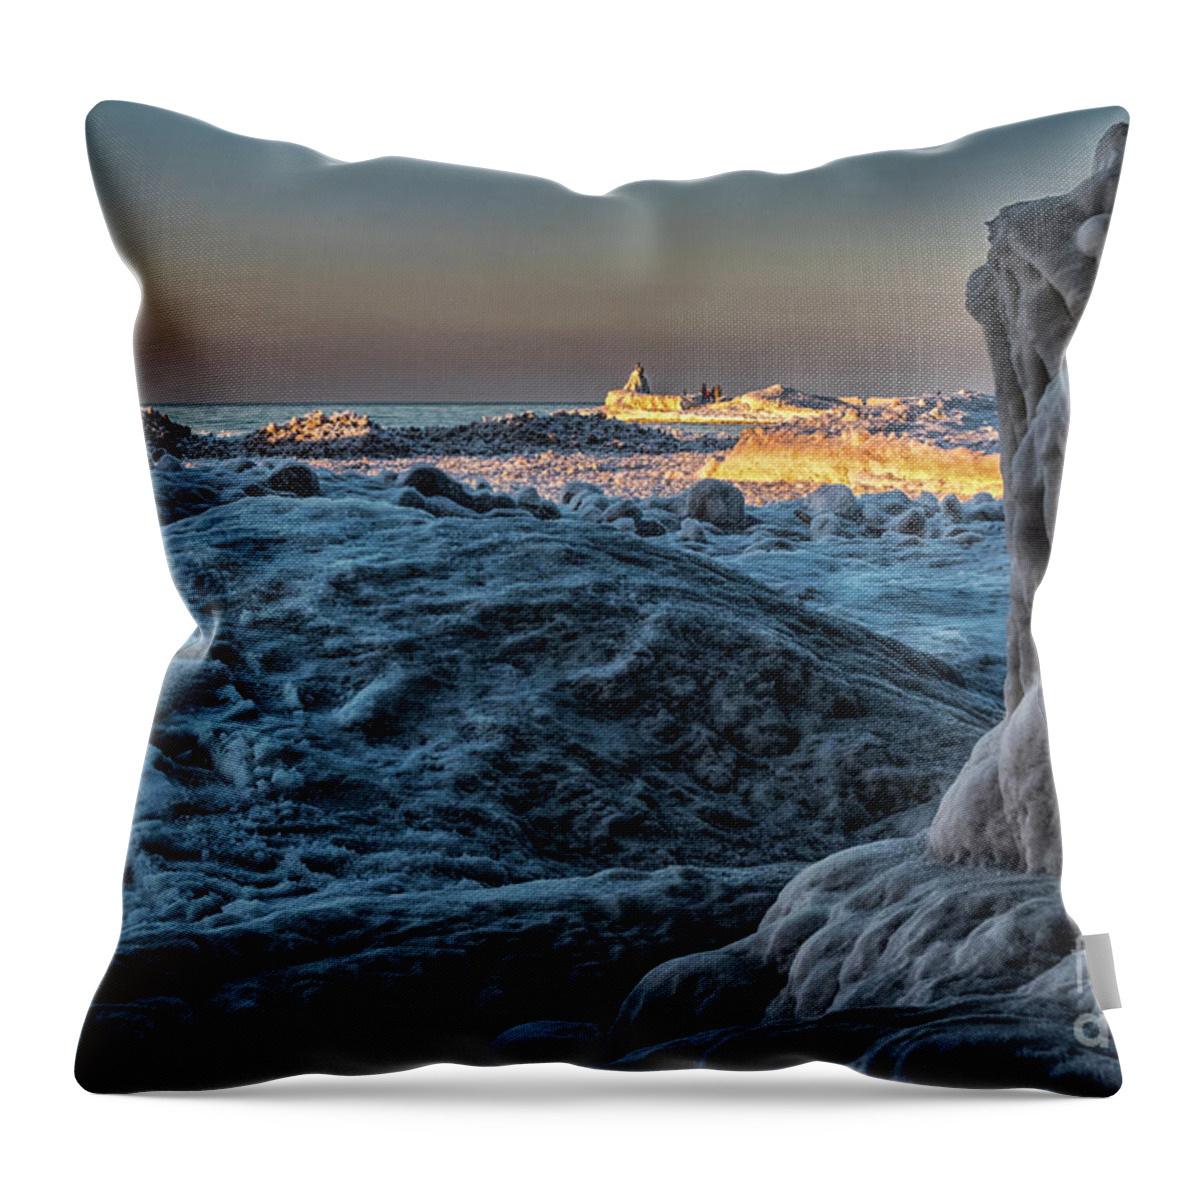 Sky Throw Pillow featuring the photograph Other Worldly by Joann Long